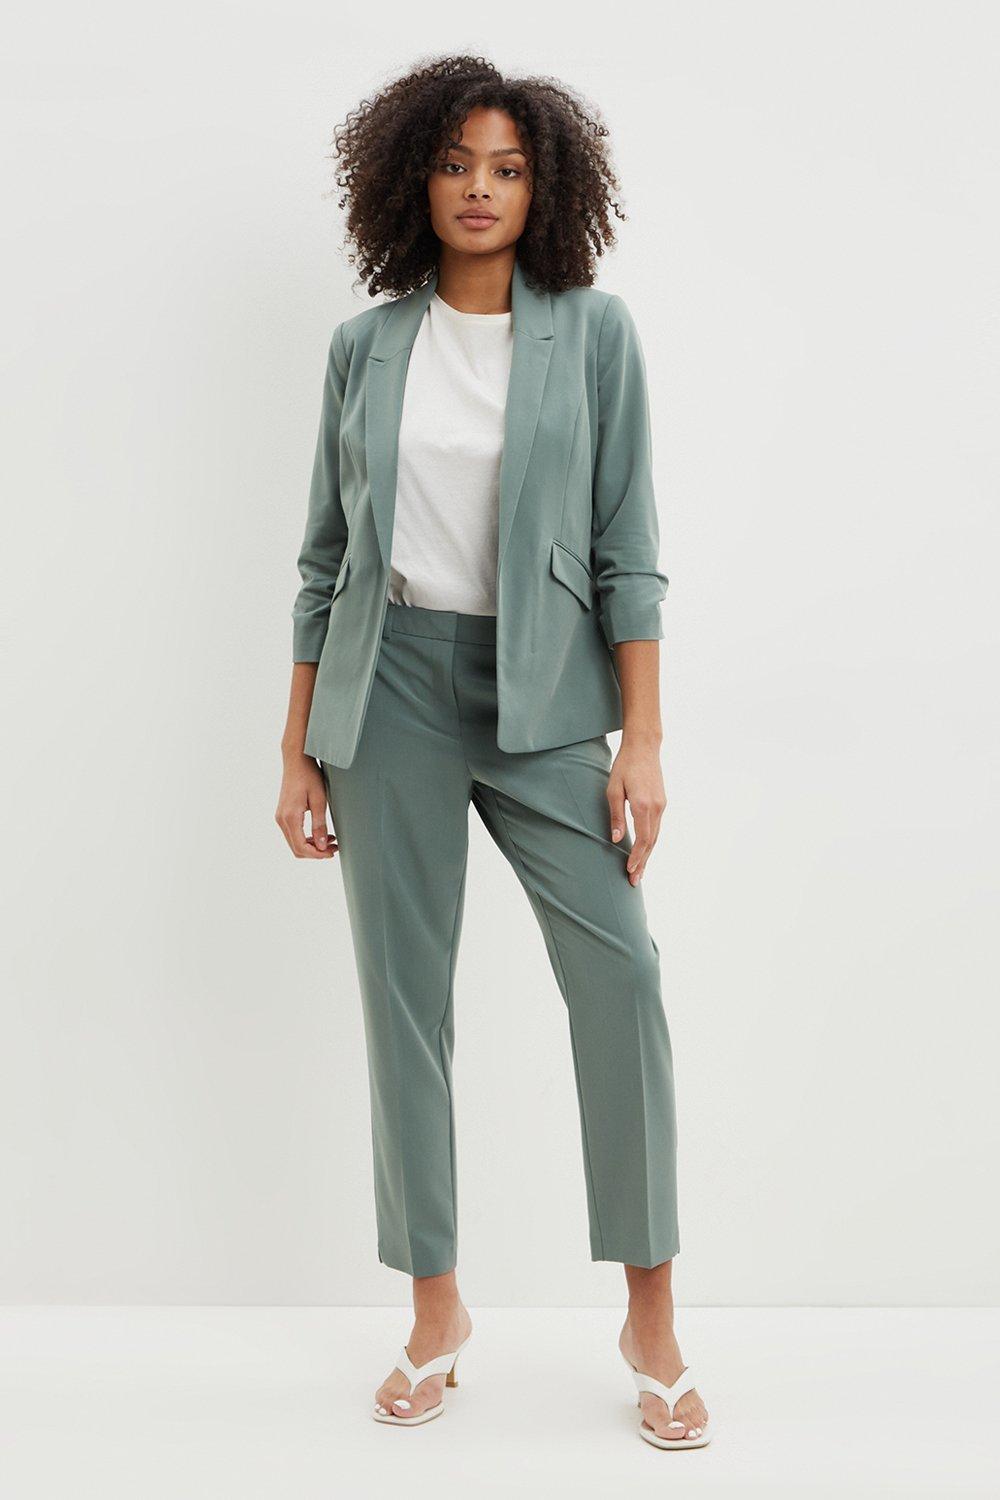 casual office wear for ladies